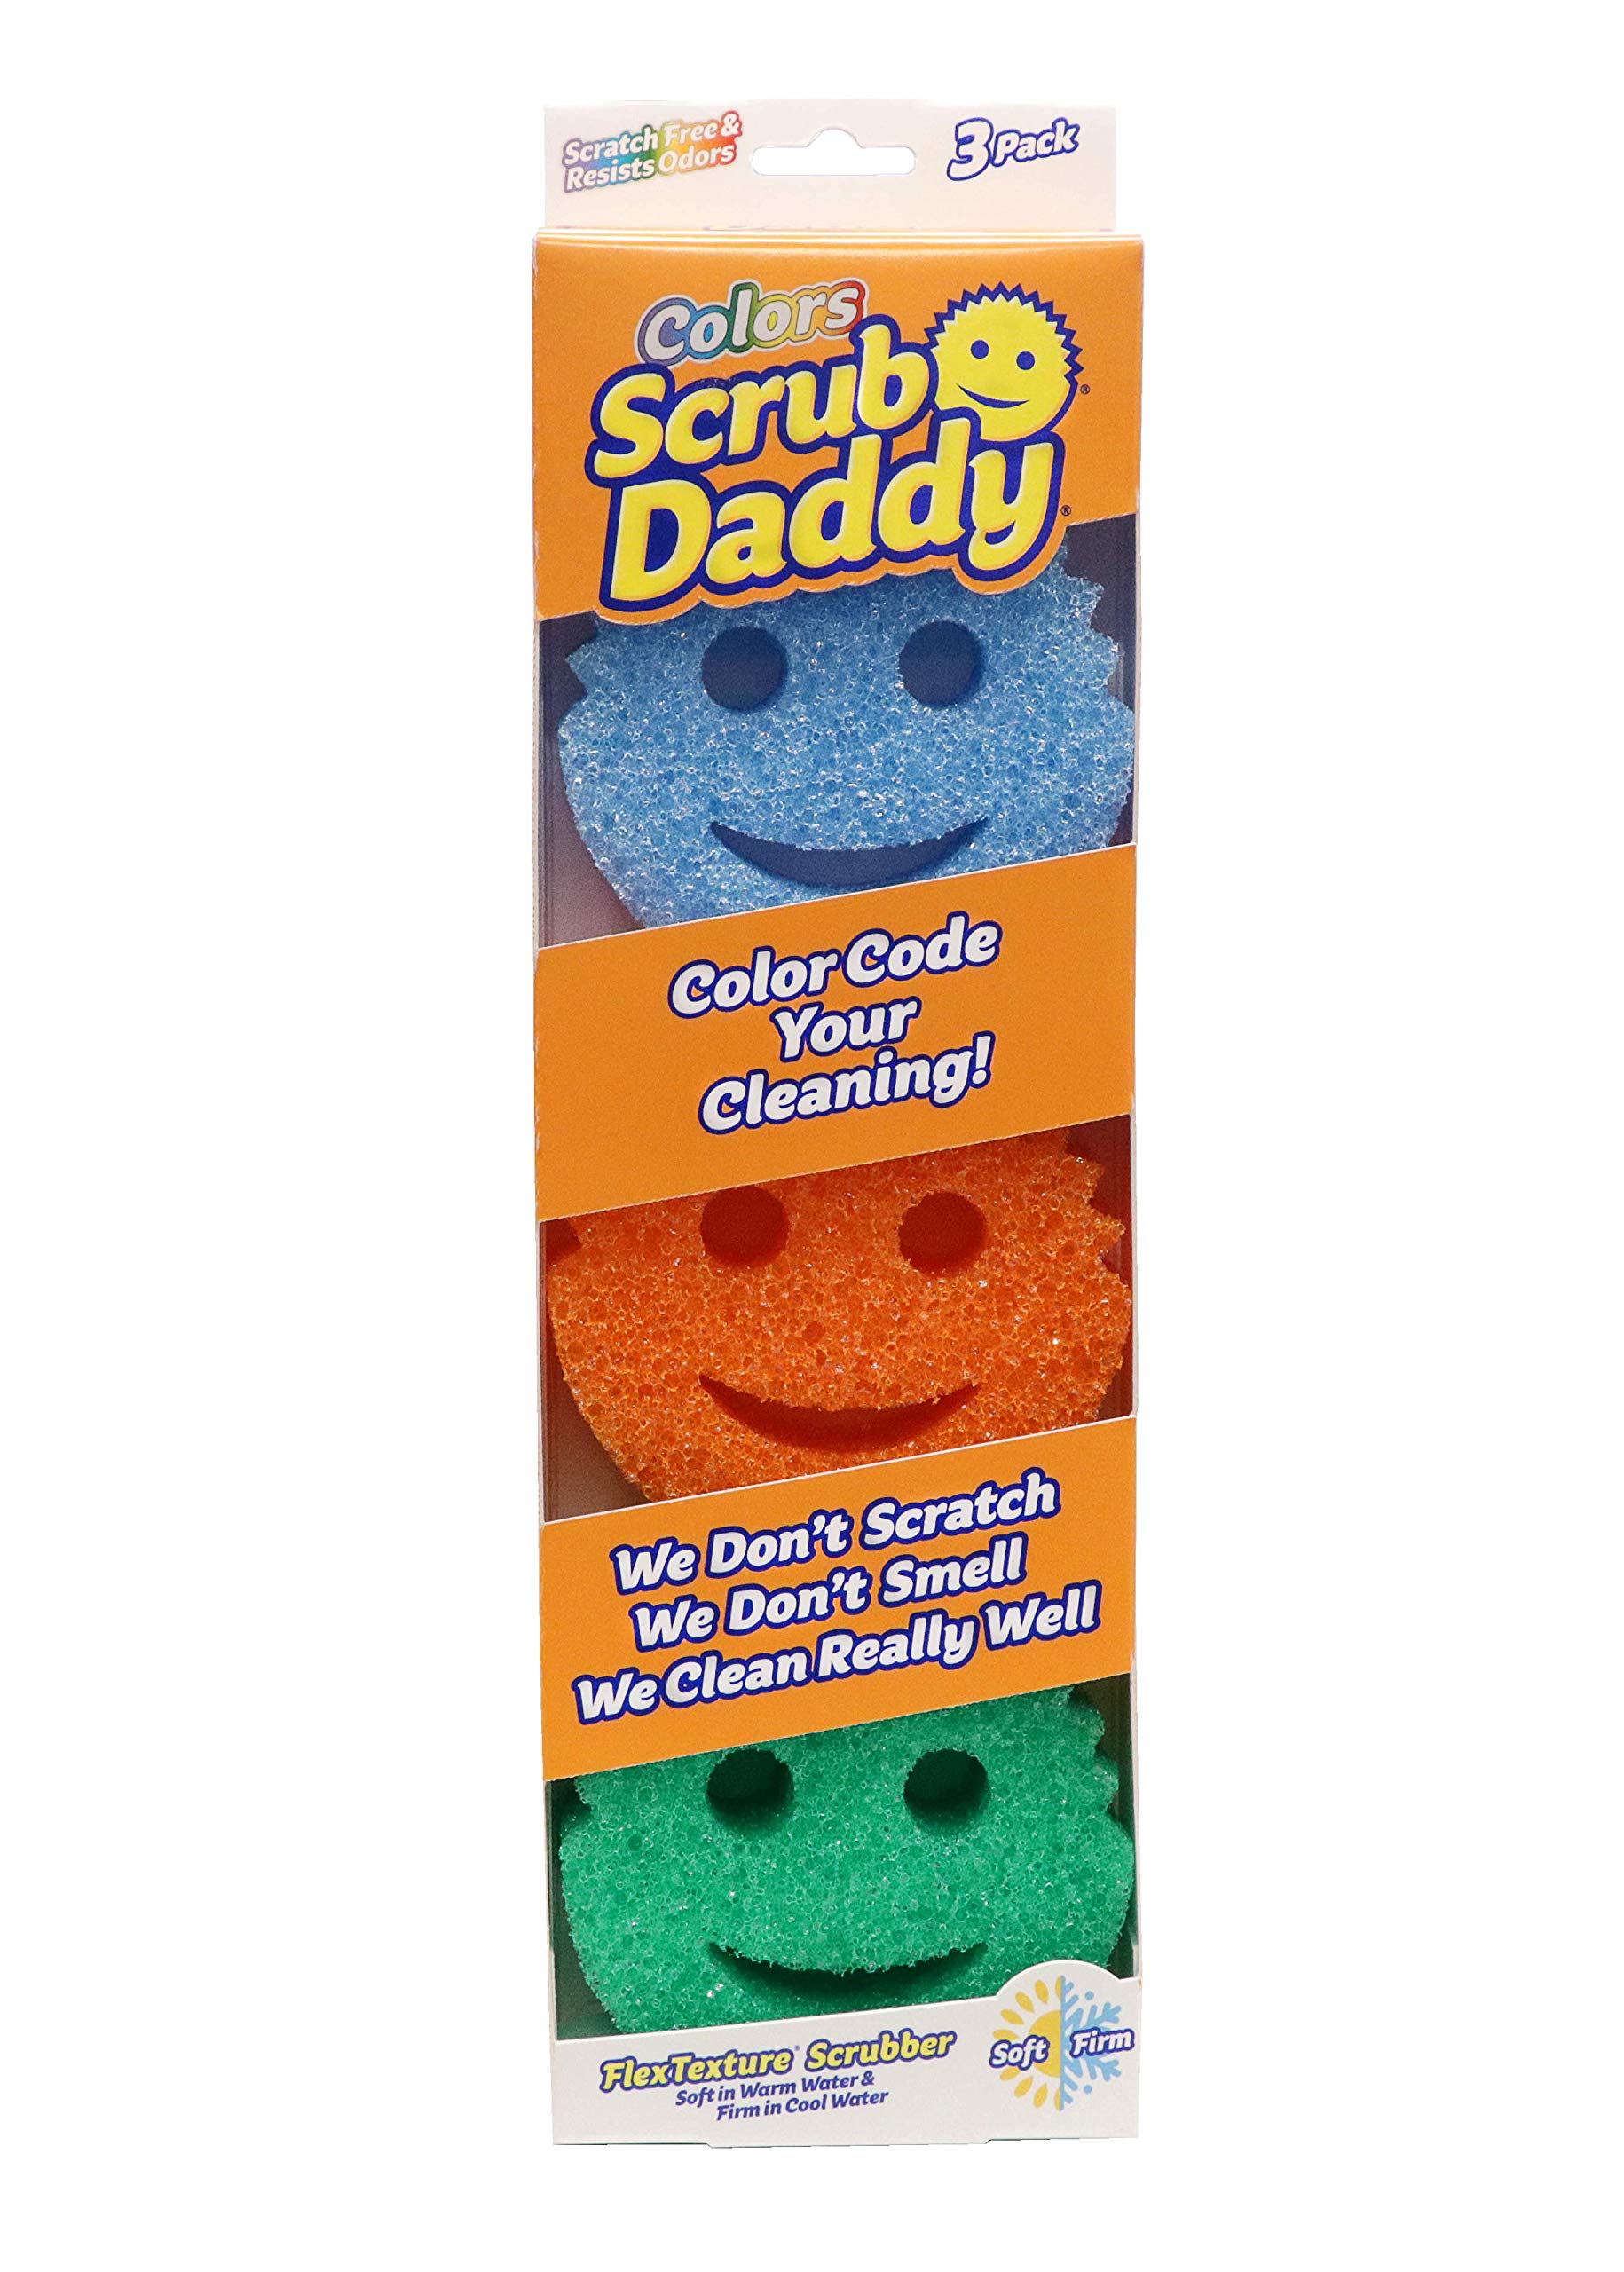 Scrub Daddy Dual Sided Sponge and Scrubber - Scrub Mommy - Scratch Free Sponge for Dishes and Home, Soft in Warm Water, Firm in Cold, Odor Resistant